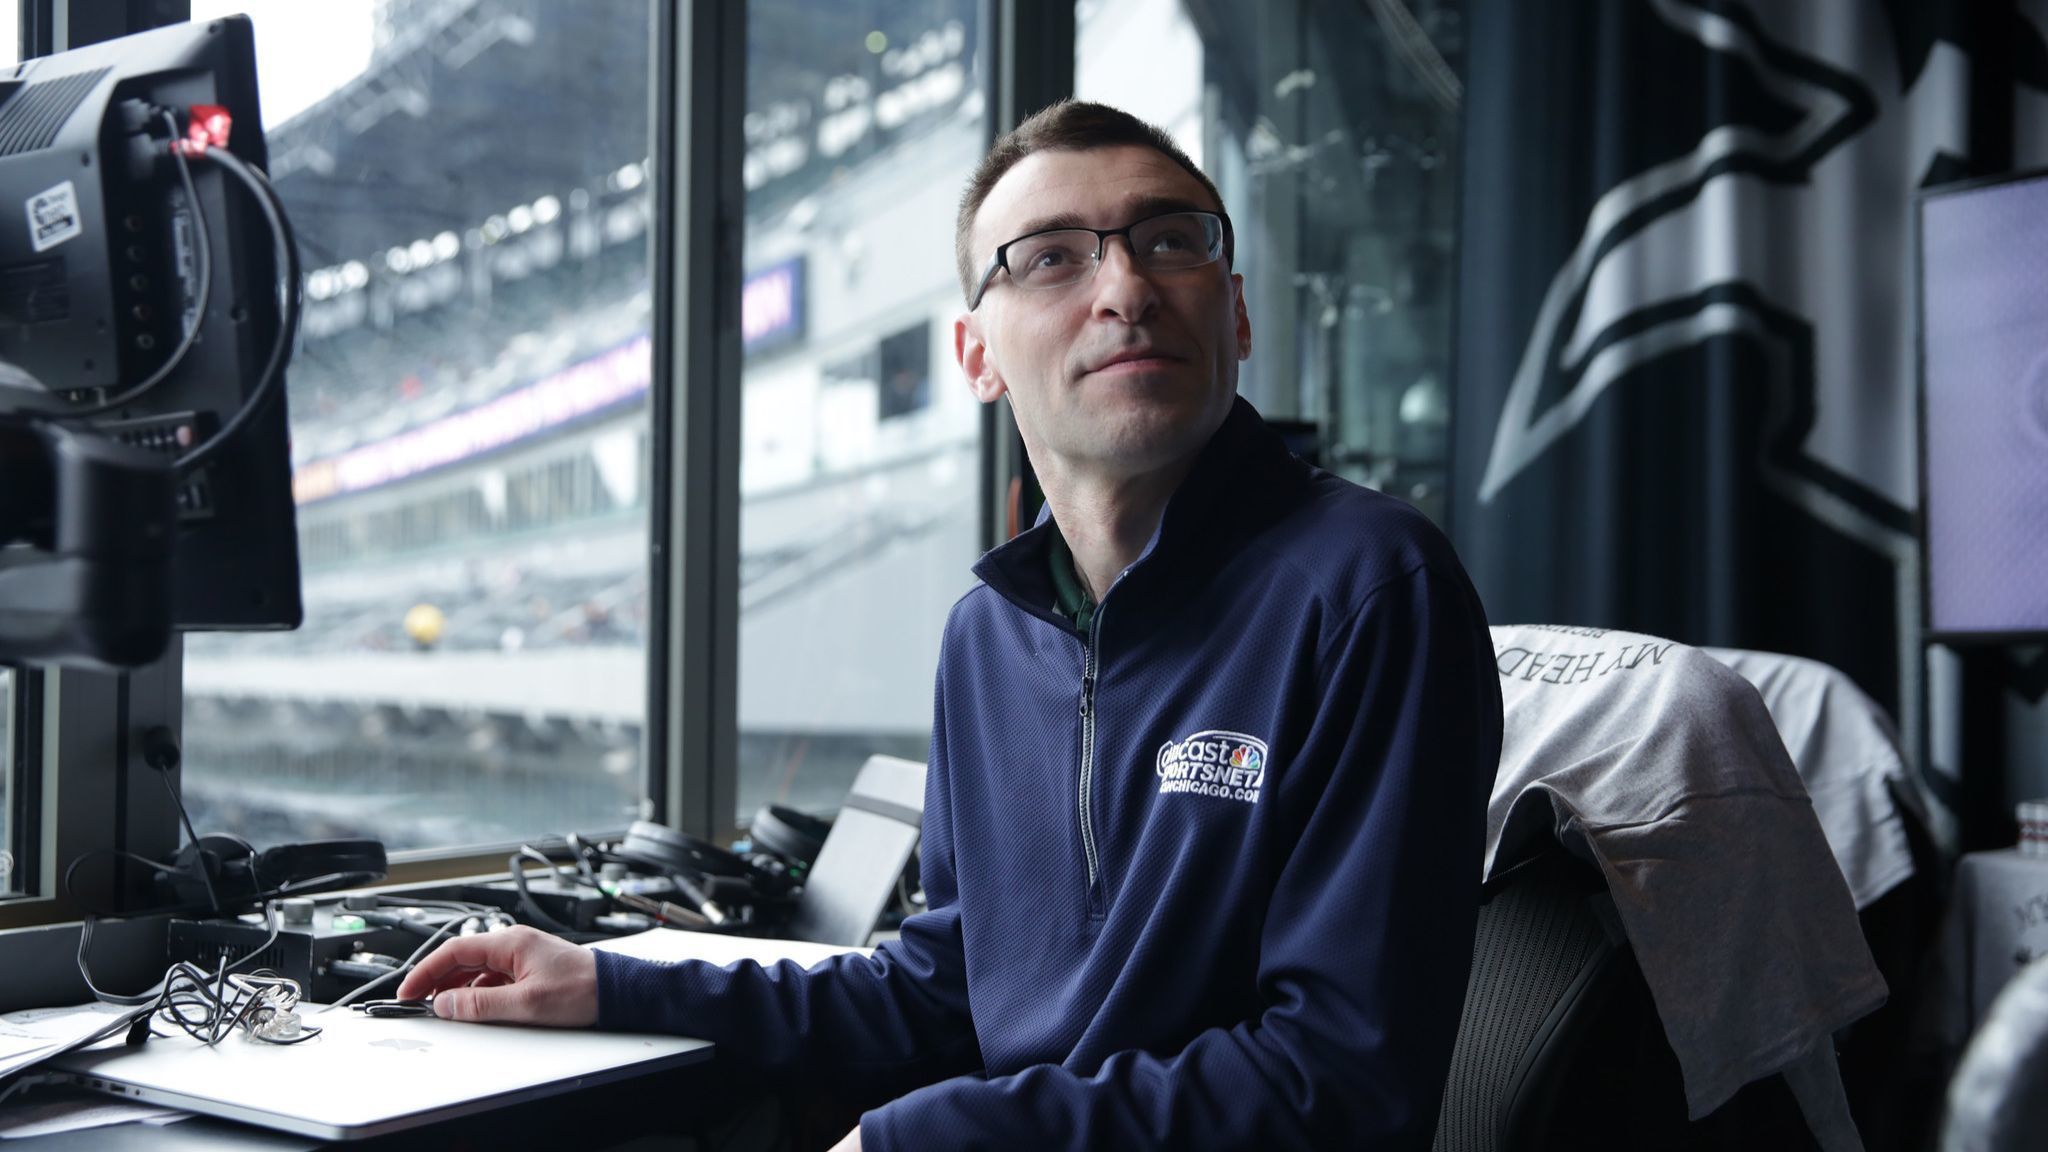 Jason Benetti on returning to White Sox booth: 'I love this job so much